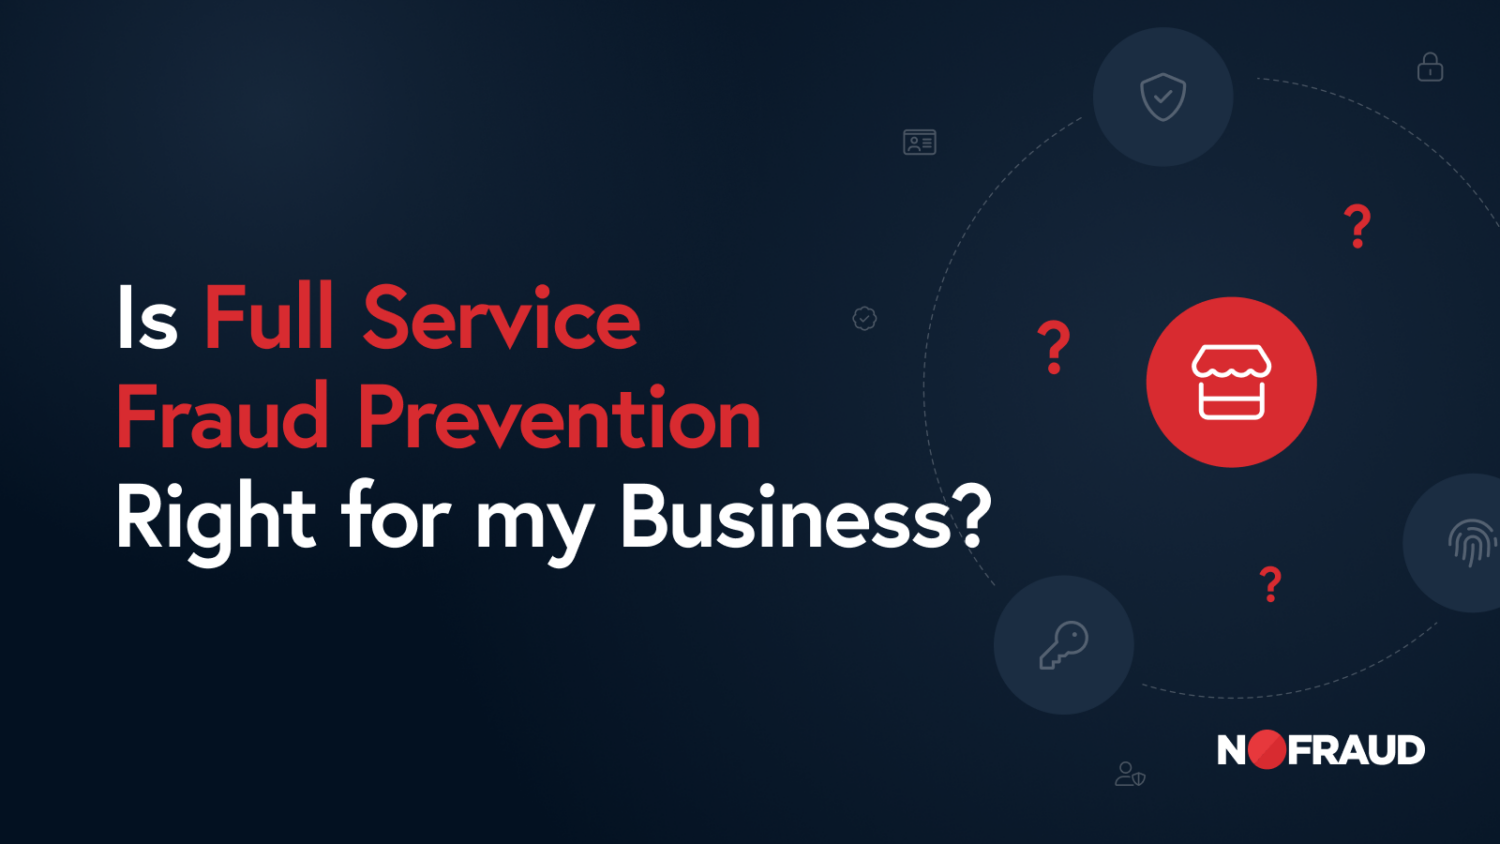 Is full service fraud prevention right for my business